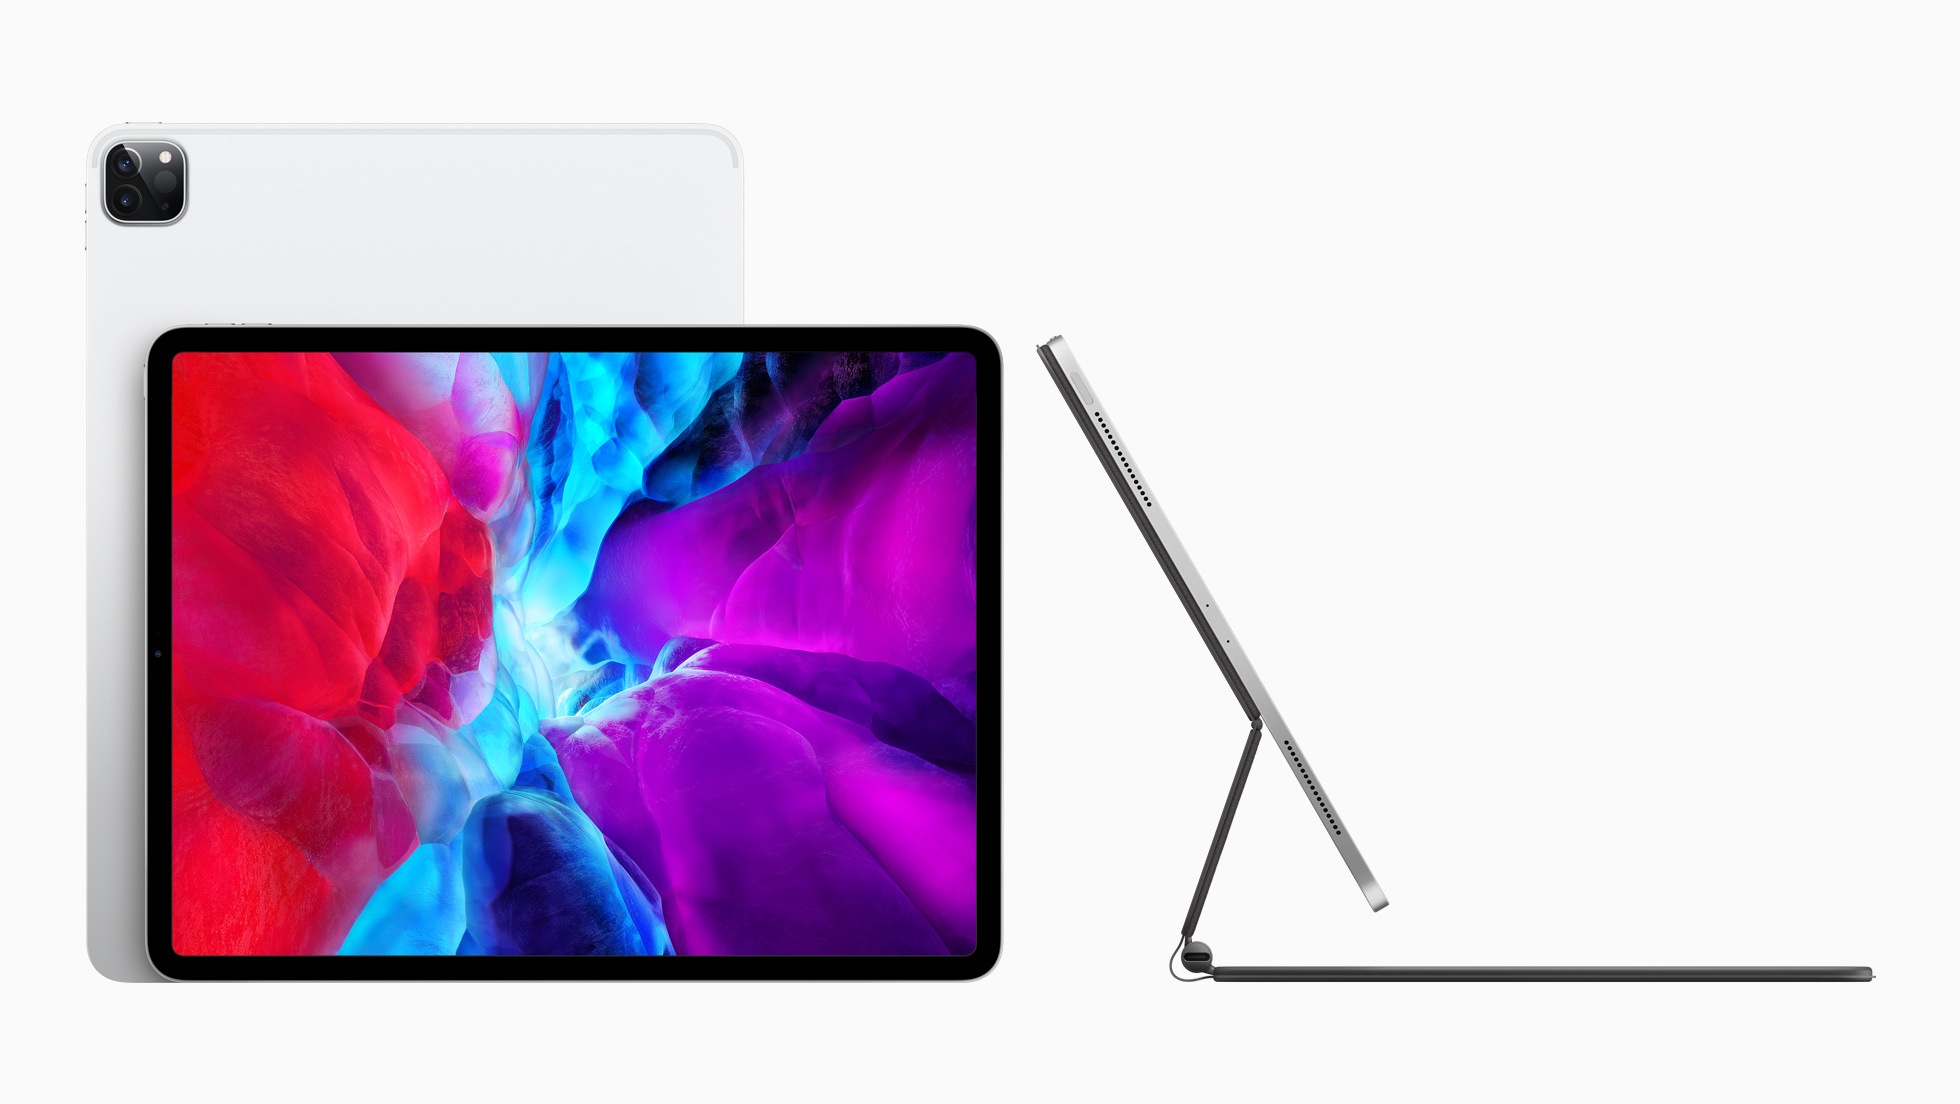 The new Apple iPad Pro is on sale in India Here are all the price